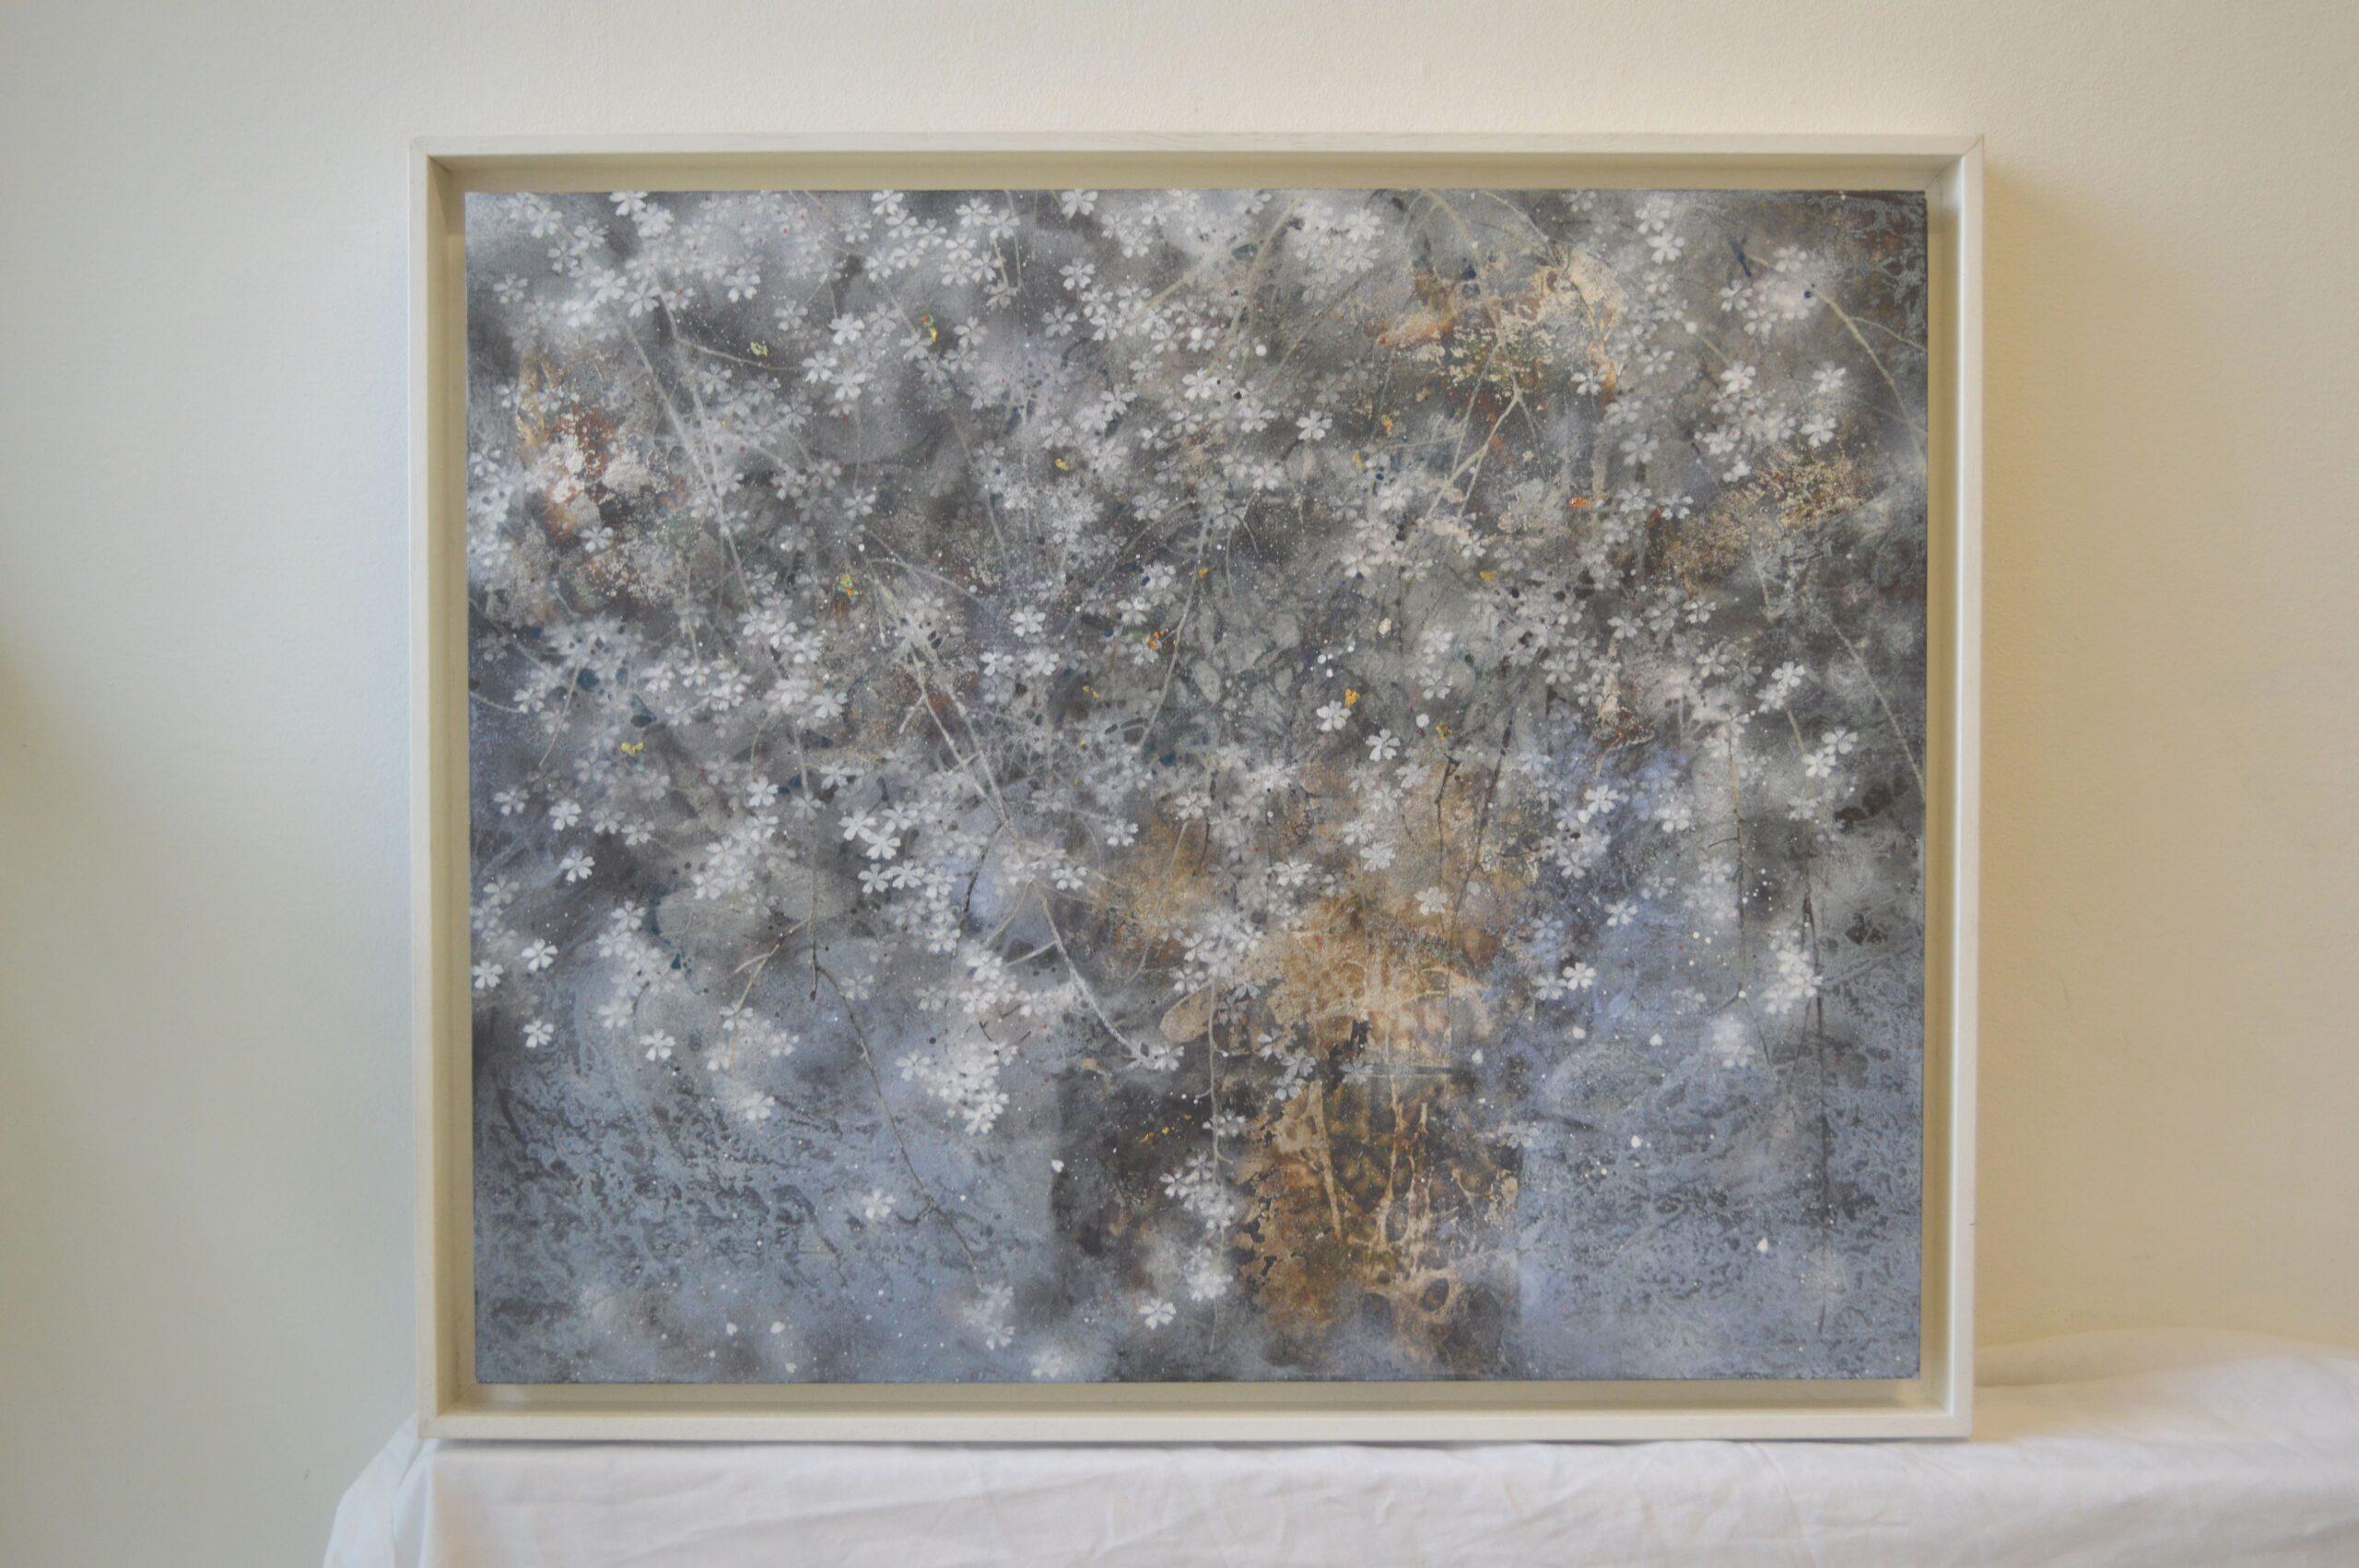 Cherry tree rain is a unique painting by contemporary artist Chen Yiching. The painting is made with mineral pigments, silver leaves on Japanese paper mounted on wood, dimensions are 50 × 61 cm (19.7 × 24 in). Dimensions of the framed (white frame)